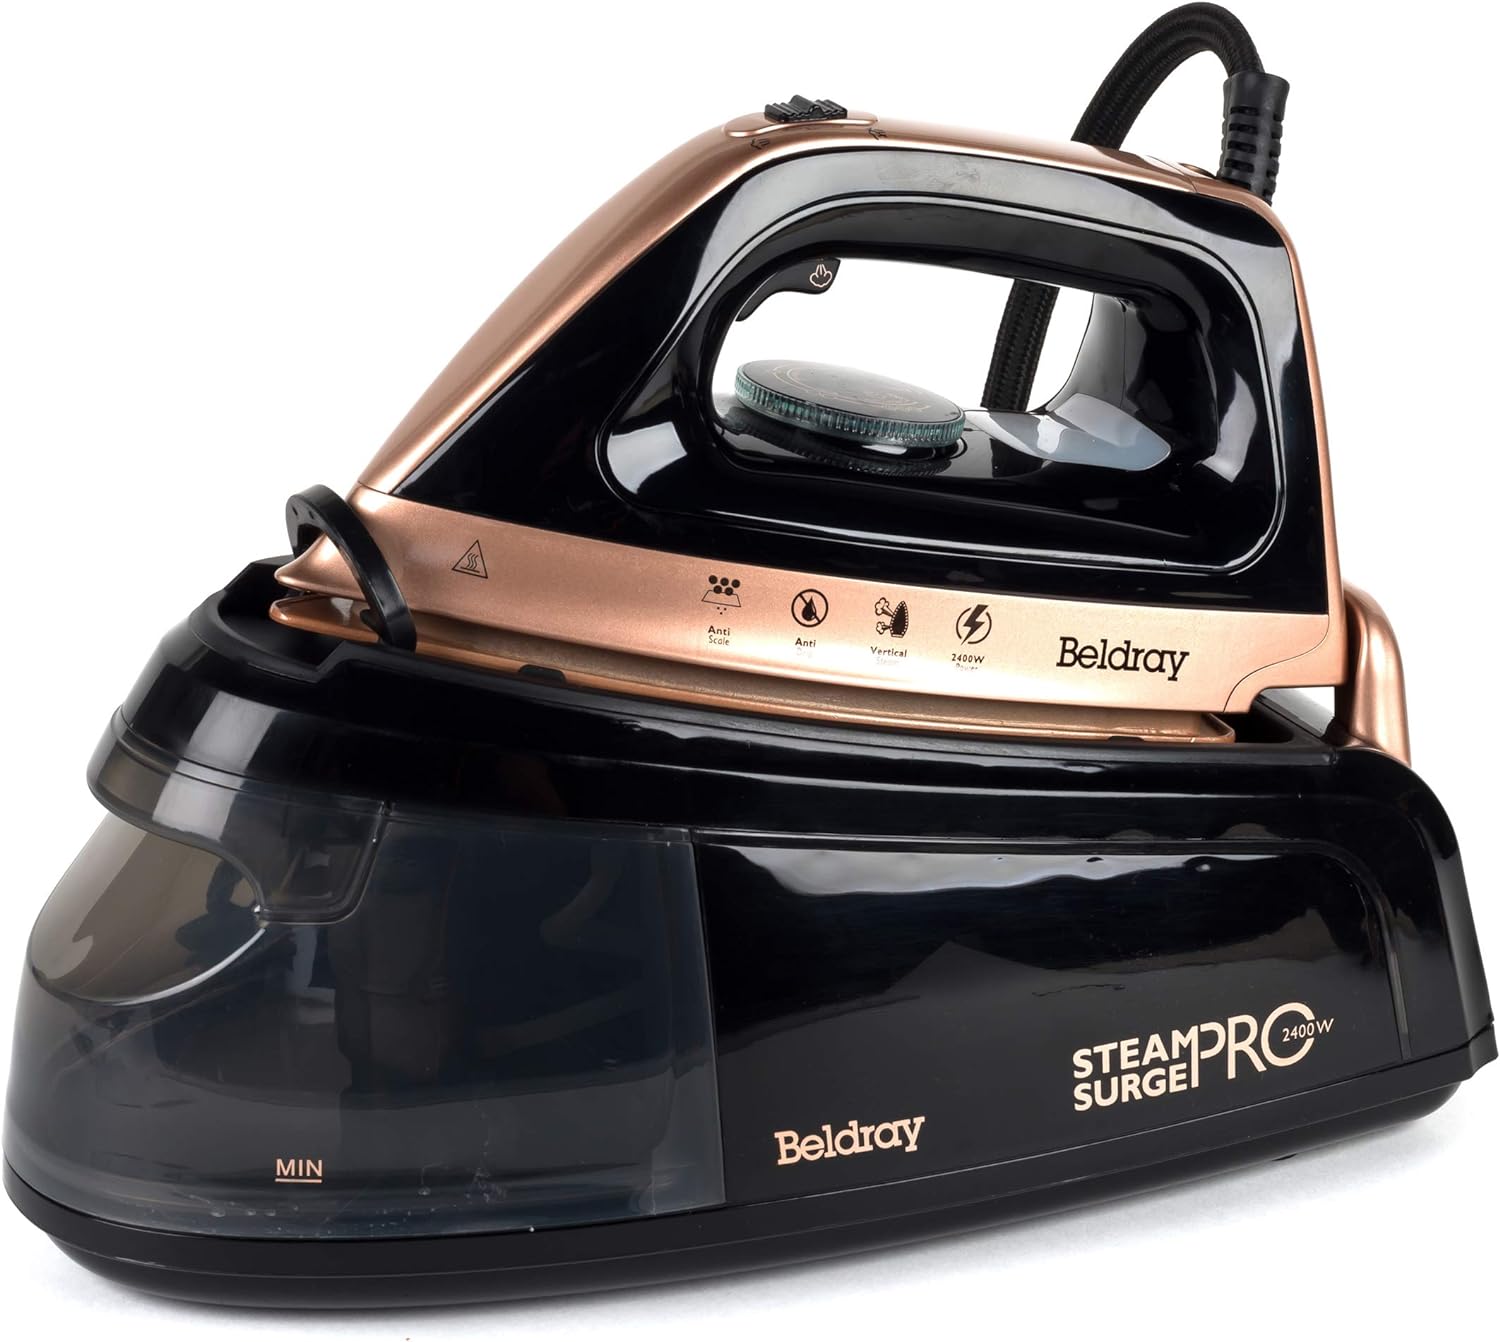 Beldray BEL01137-150 Steam Station Iron – Steam Surge Pro With Large 1.2 L Detachable Water Tank, Ceramic Soleplate, Anti-Calc, Vertical Steaming, Variable Temperature, Cord Storage, 2400 W, Rose Gold